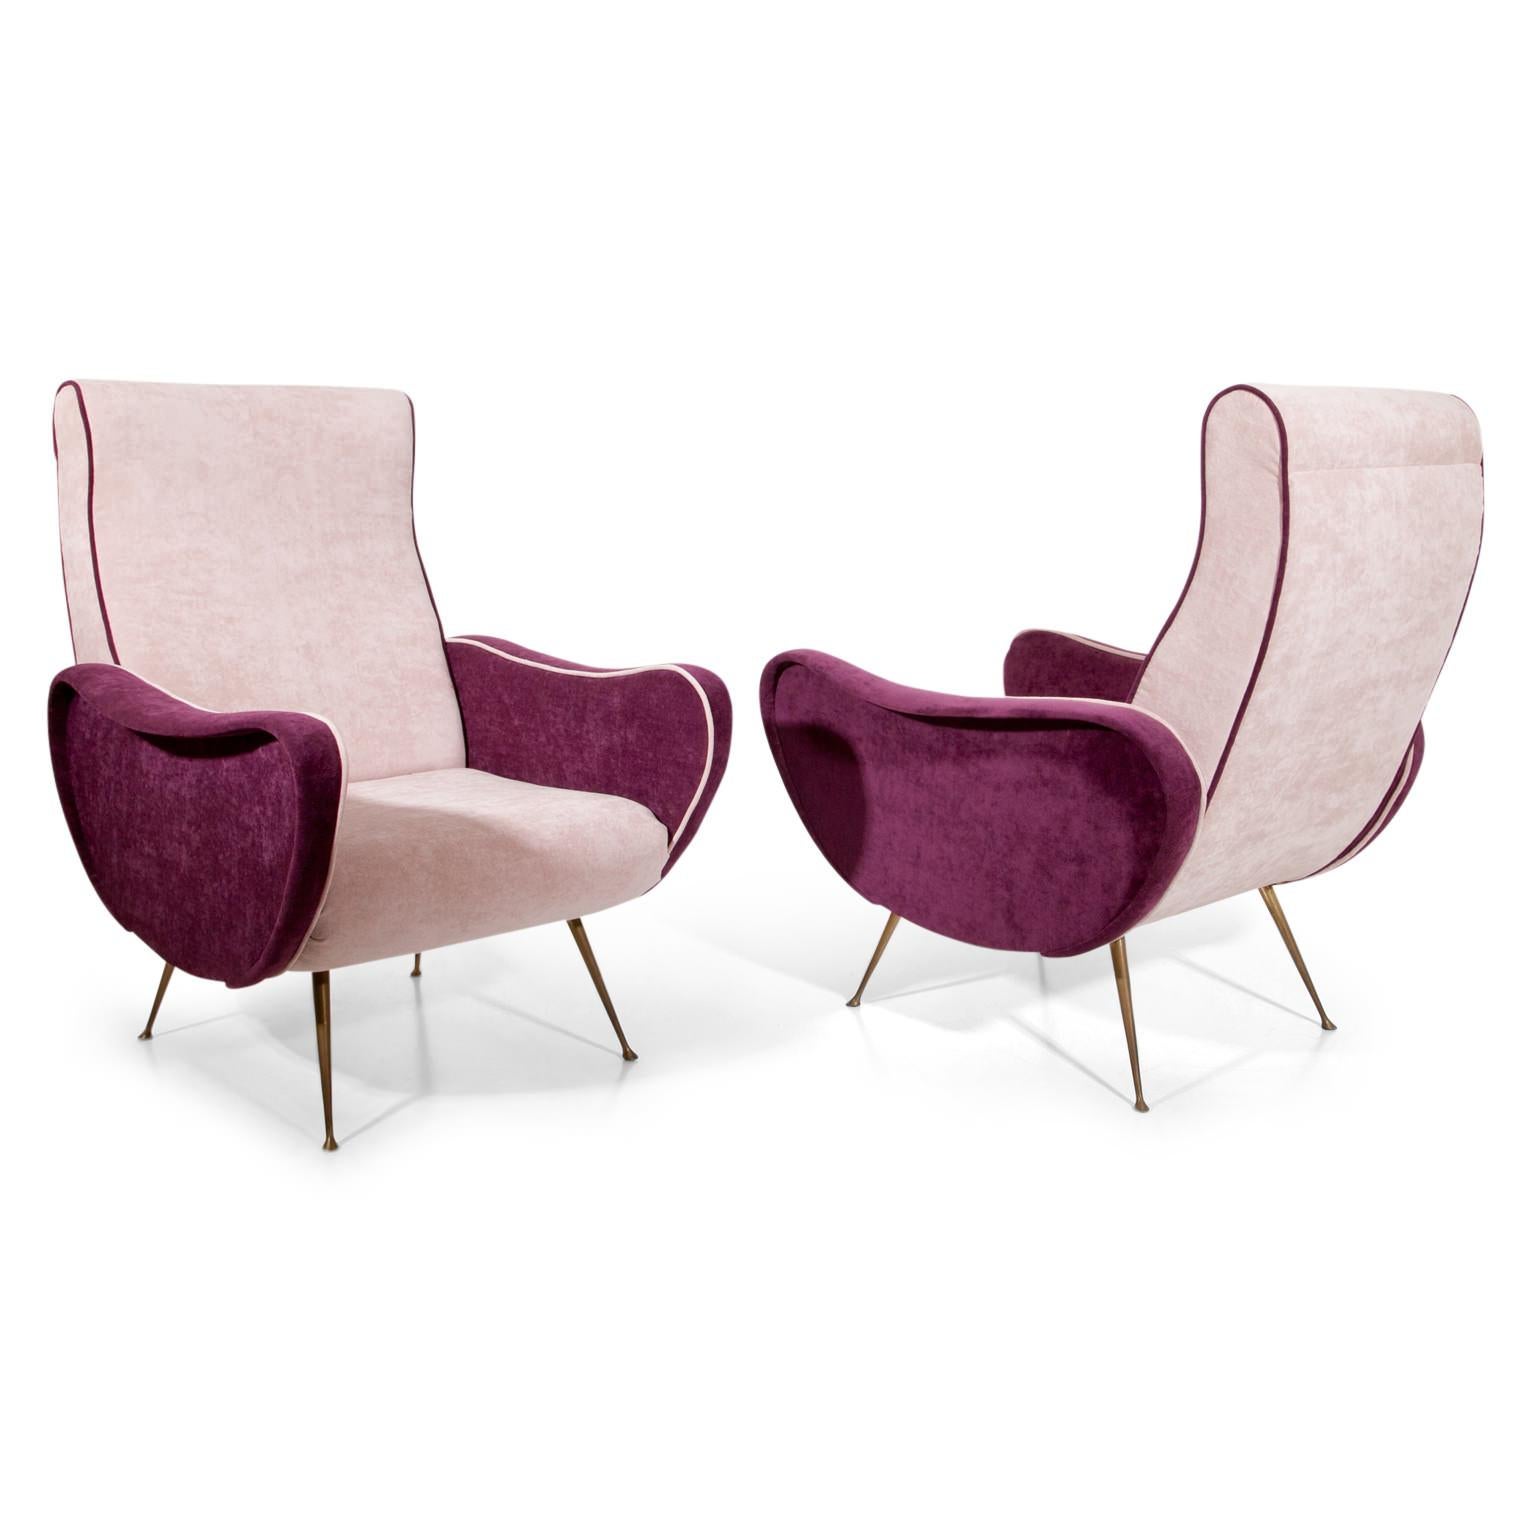 Pair of midcentury lounge chairs, standing on thin brass feet. The kidney-shaped sides were reupholstered with berry-red fabric, the seat and backrest in a soft pink fabric.